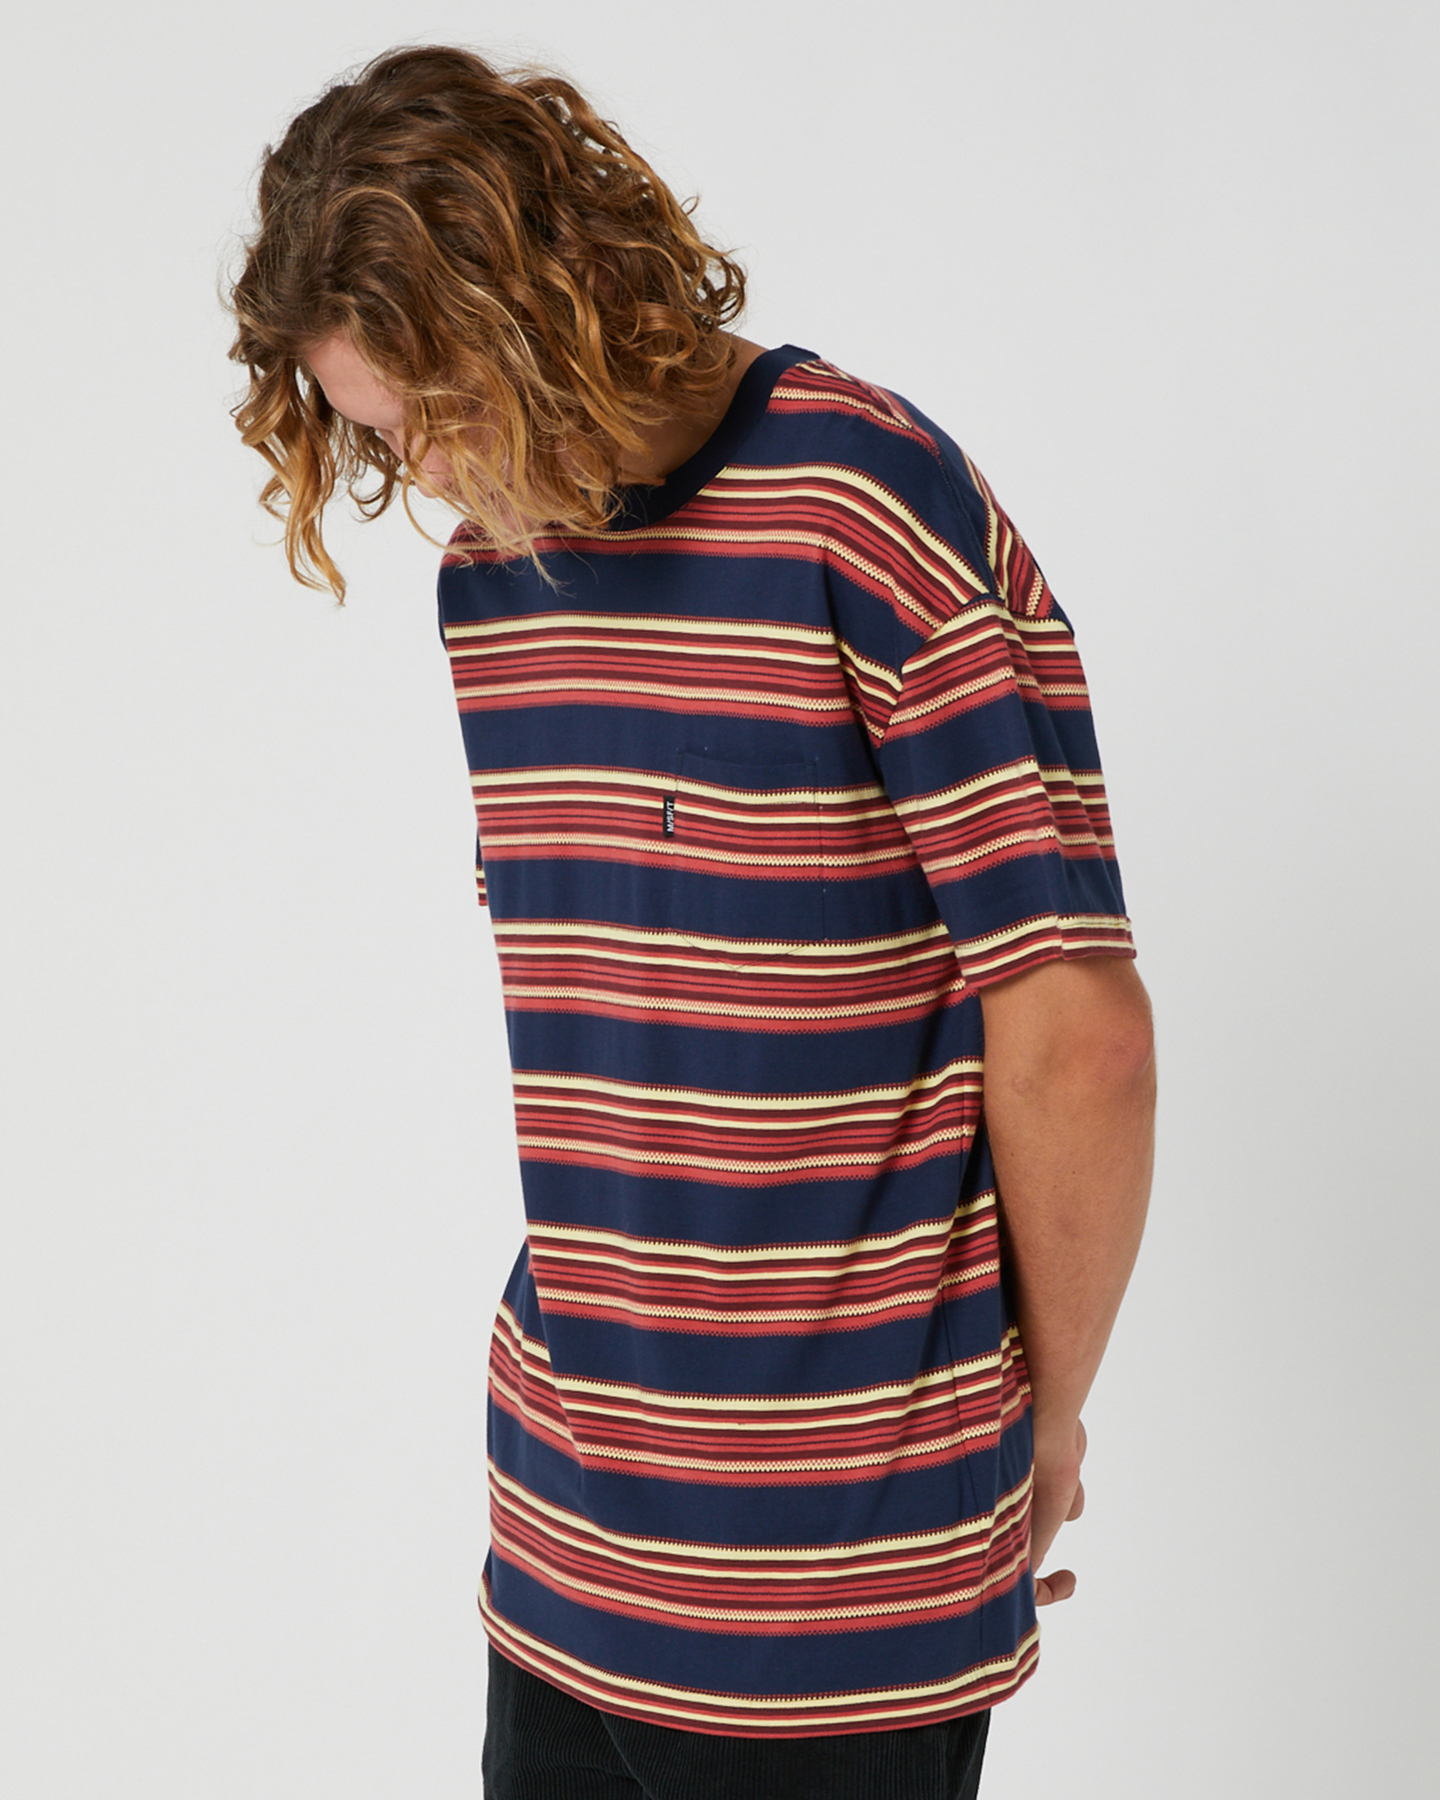 Misfit Grudge Against Mens Ss Tee - Navy | SurfStitch